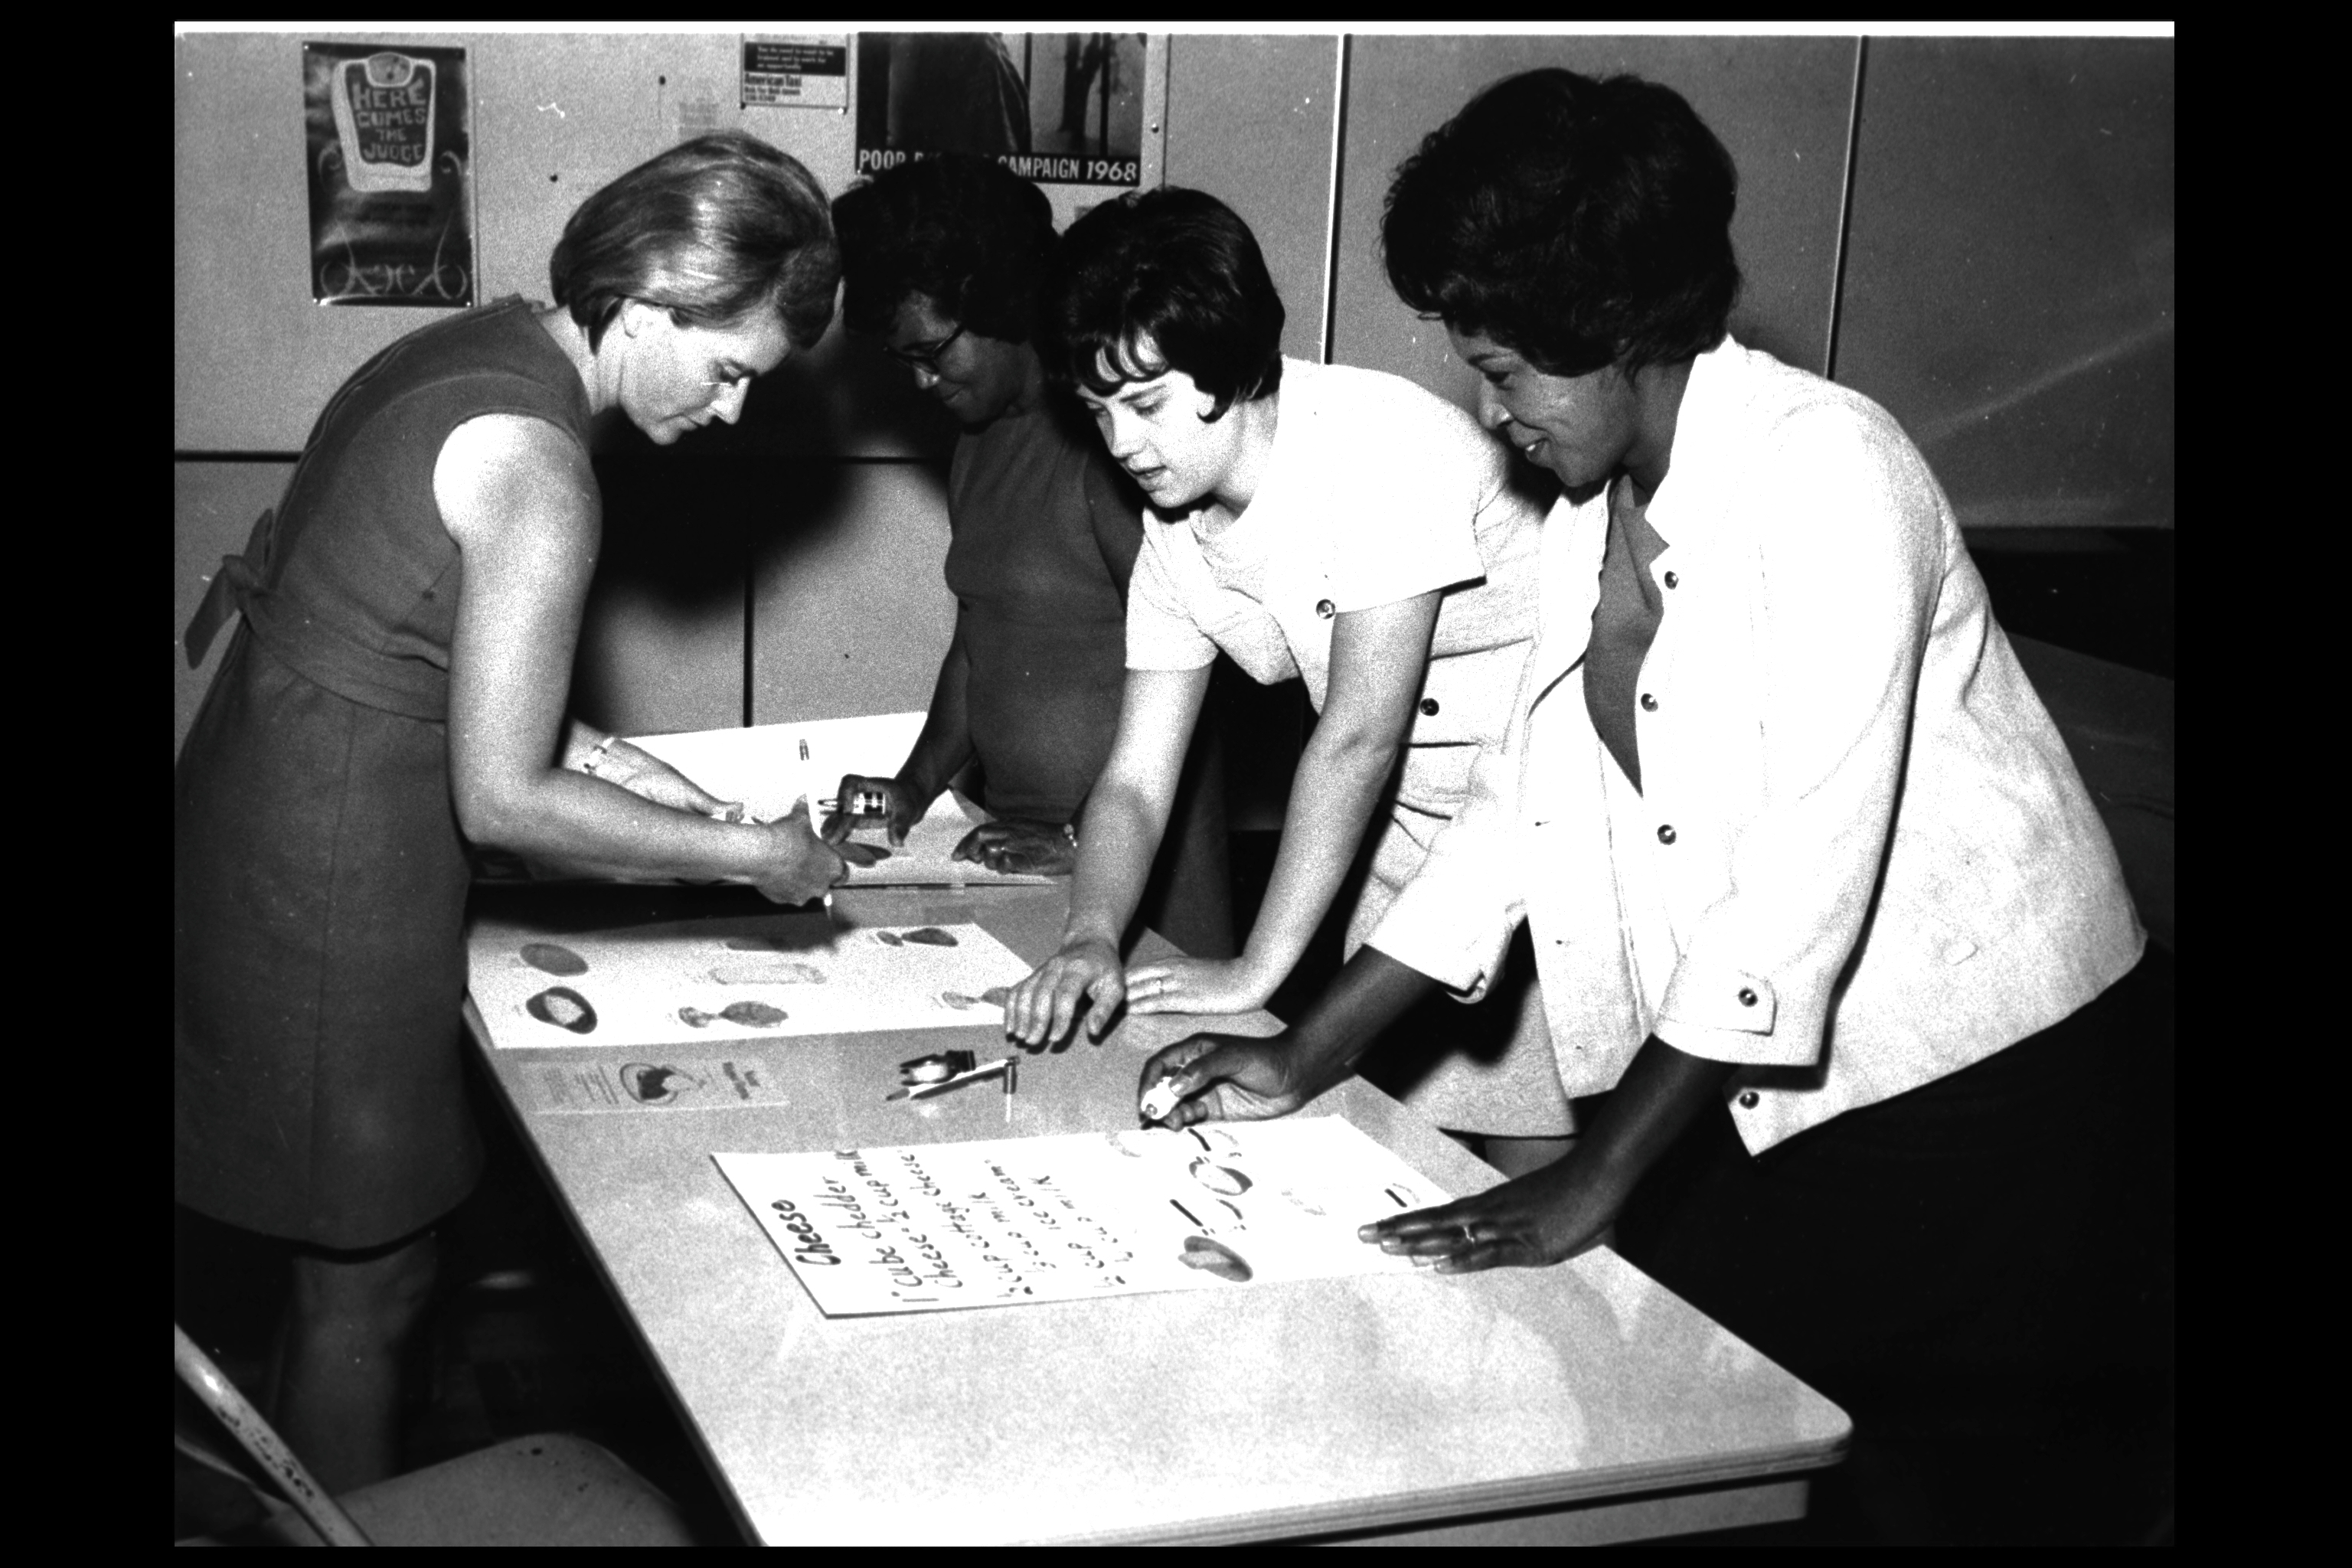 historical black and white photo of 4 nutrition educators making a poster in the 1960s